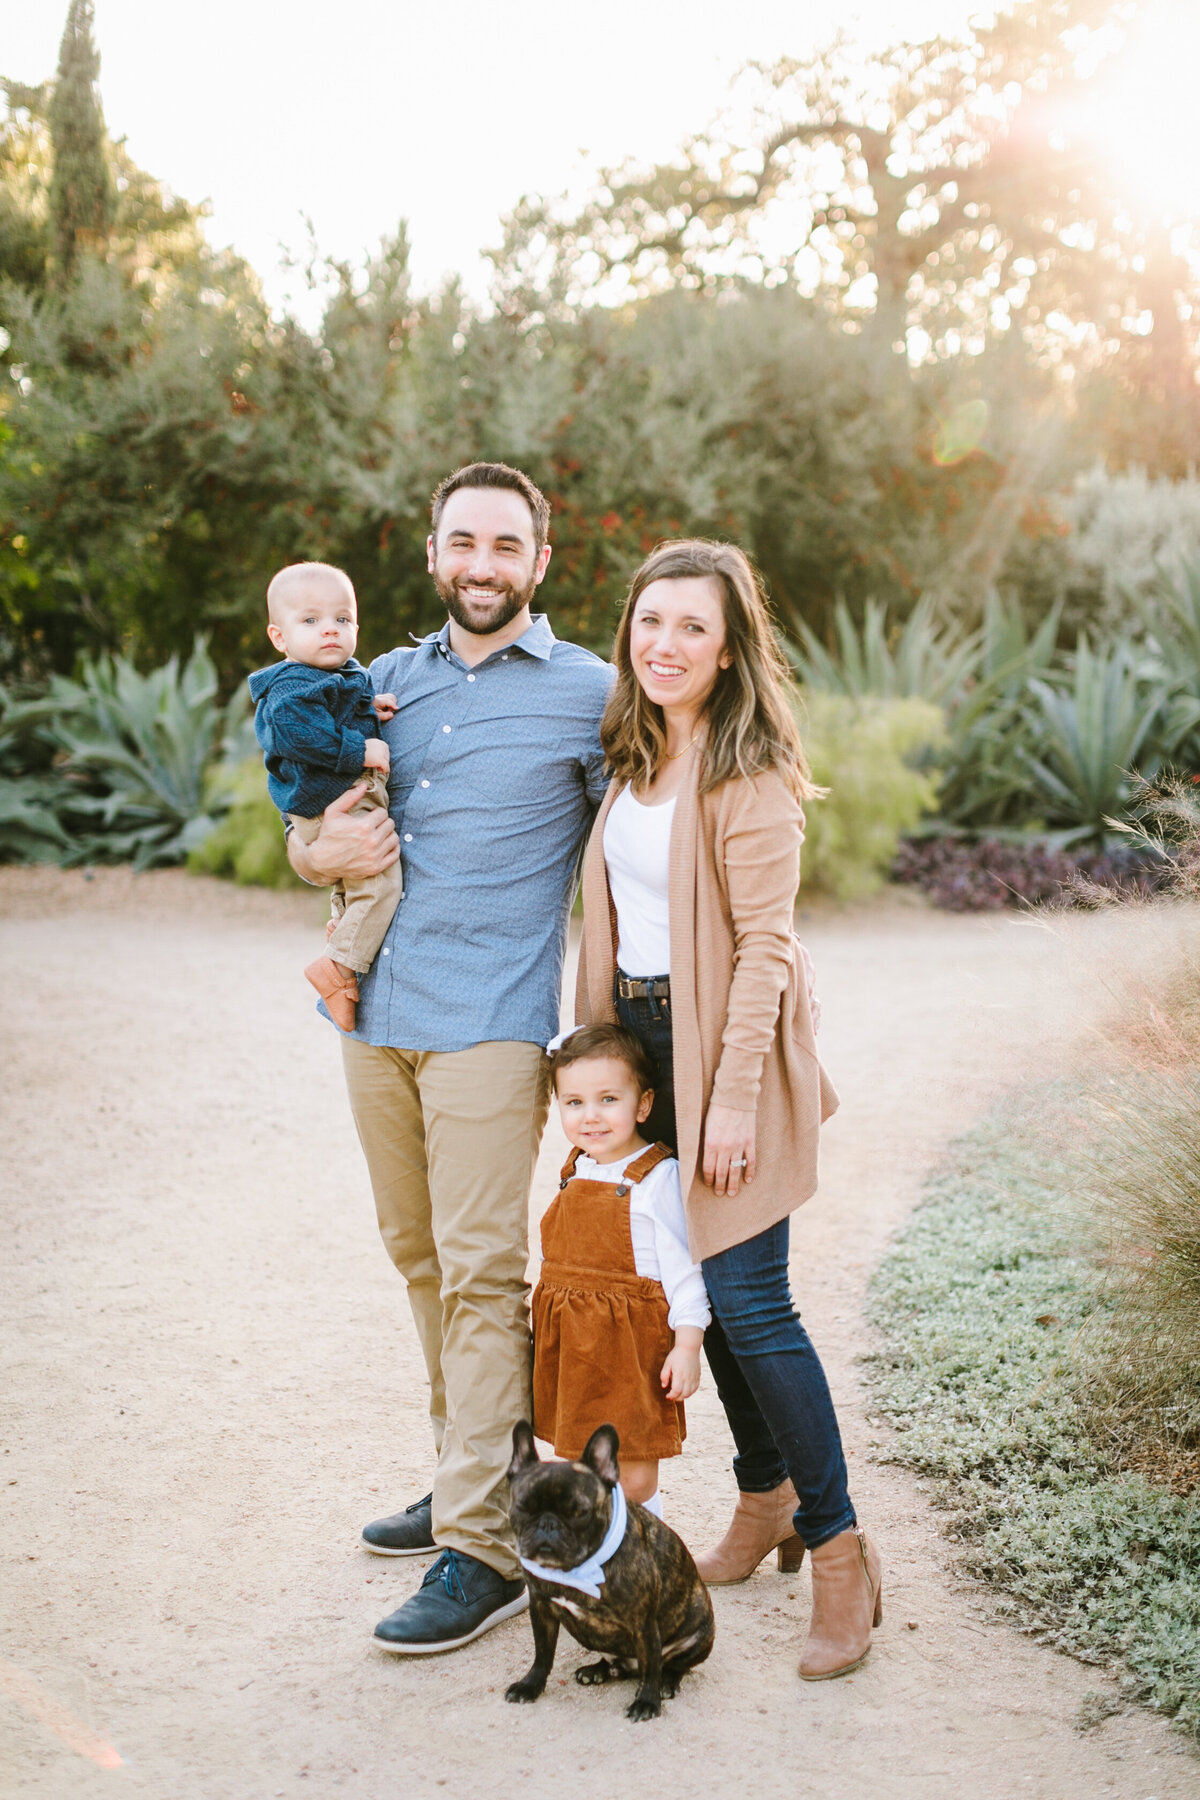 Best California and Texas Family Photographer-Jodee Debes Photography-41